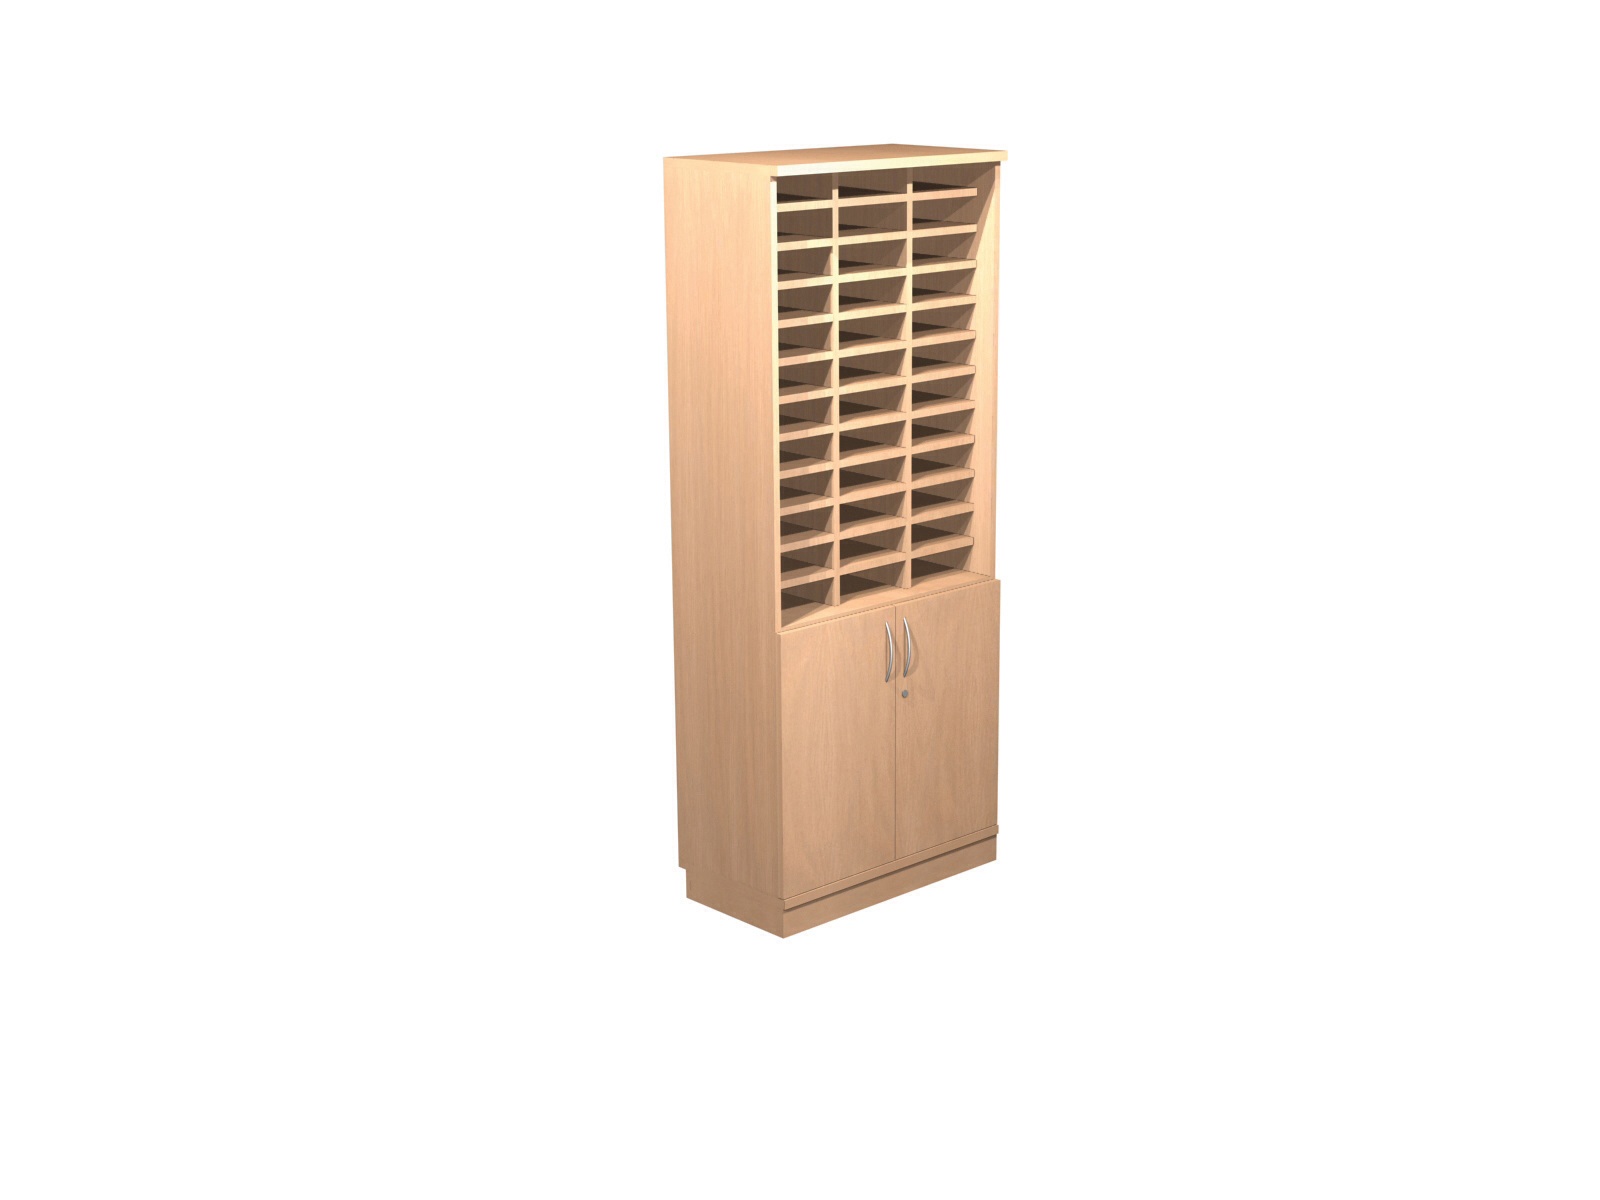 Walnut 36 compartment pigeon hole unit with doors and shelf below 1954h x800w x425d